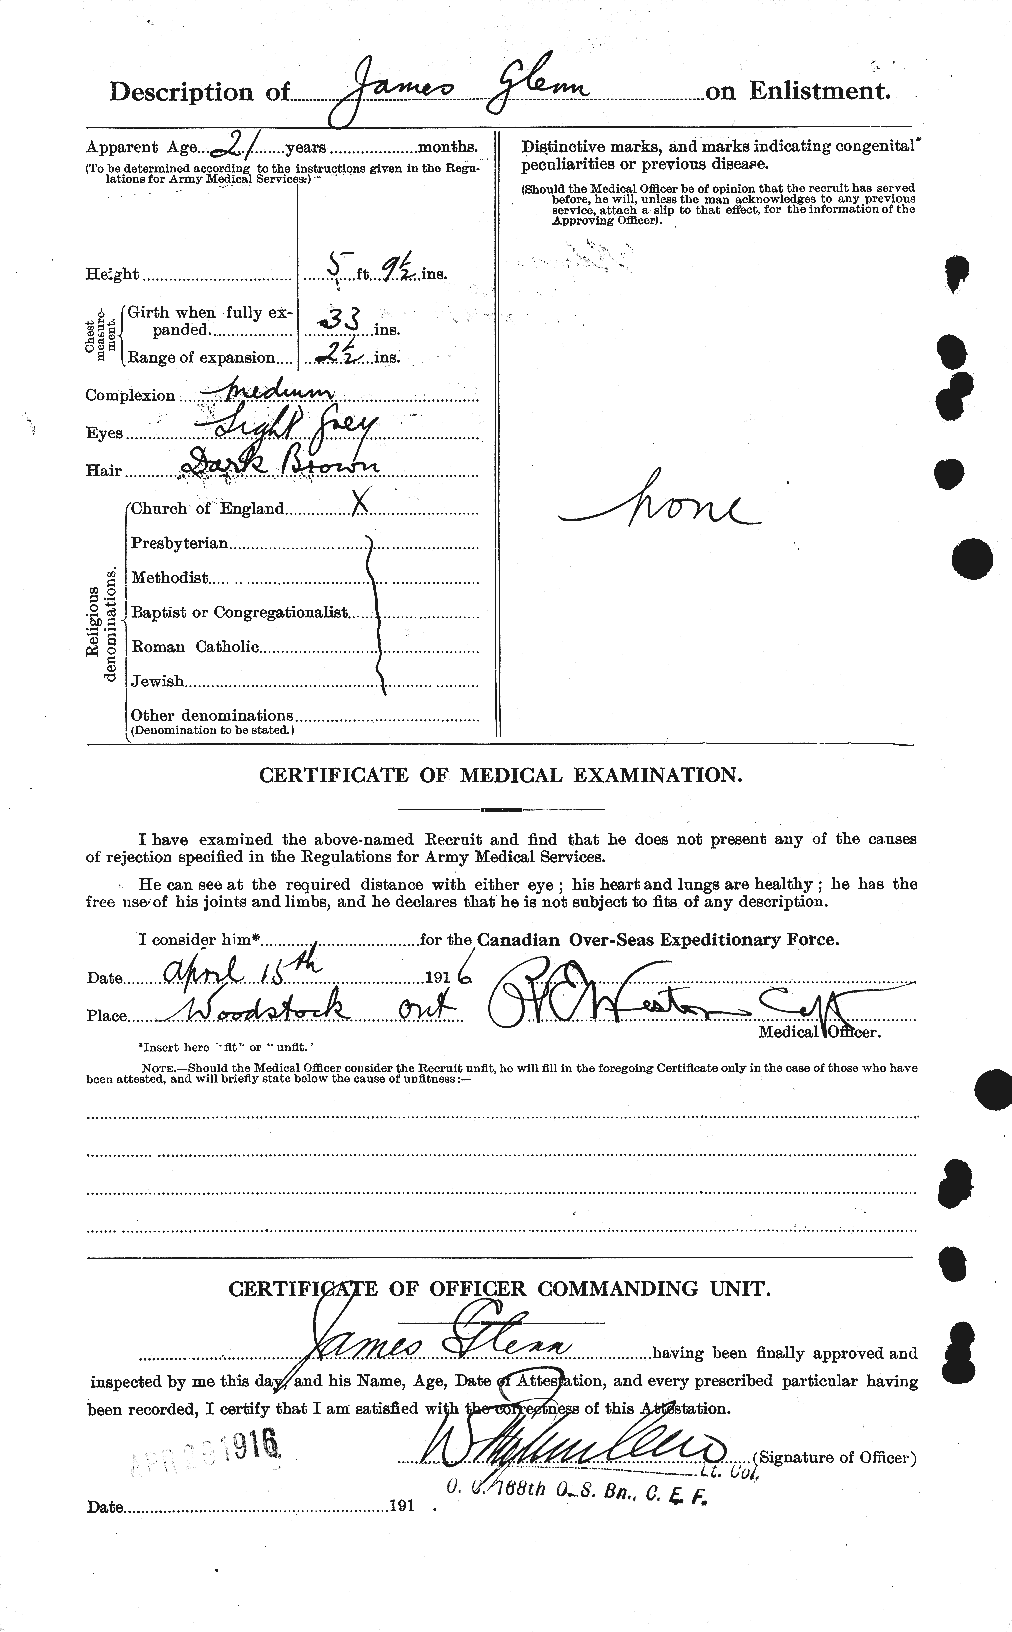 Personnel Records of the First World War - CEF 352952b